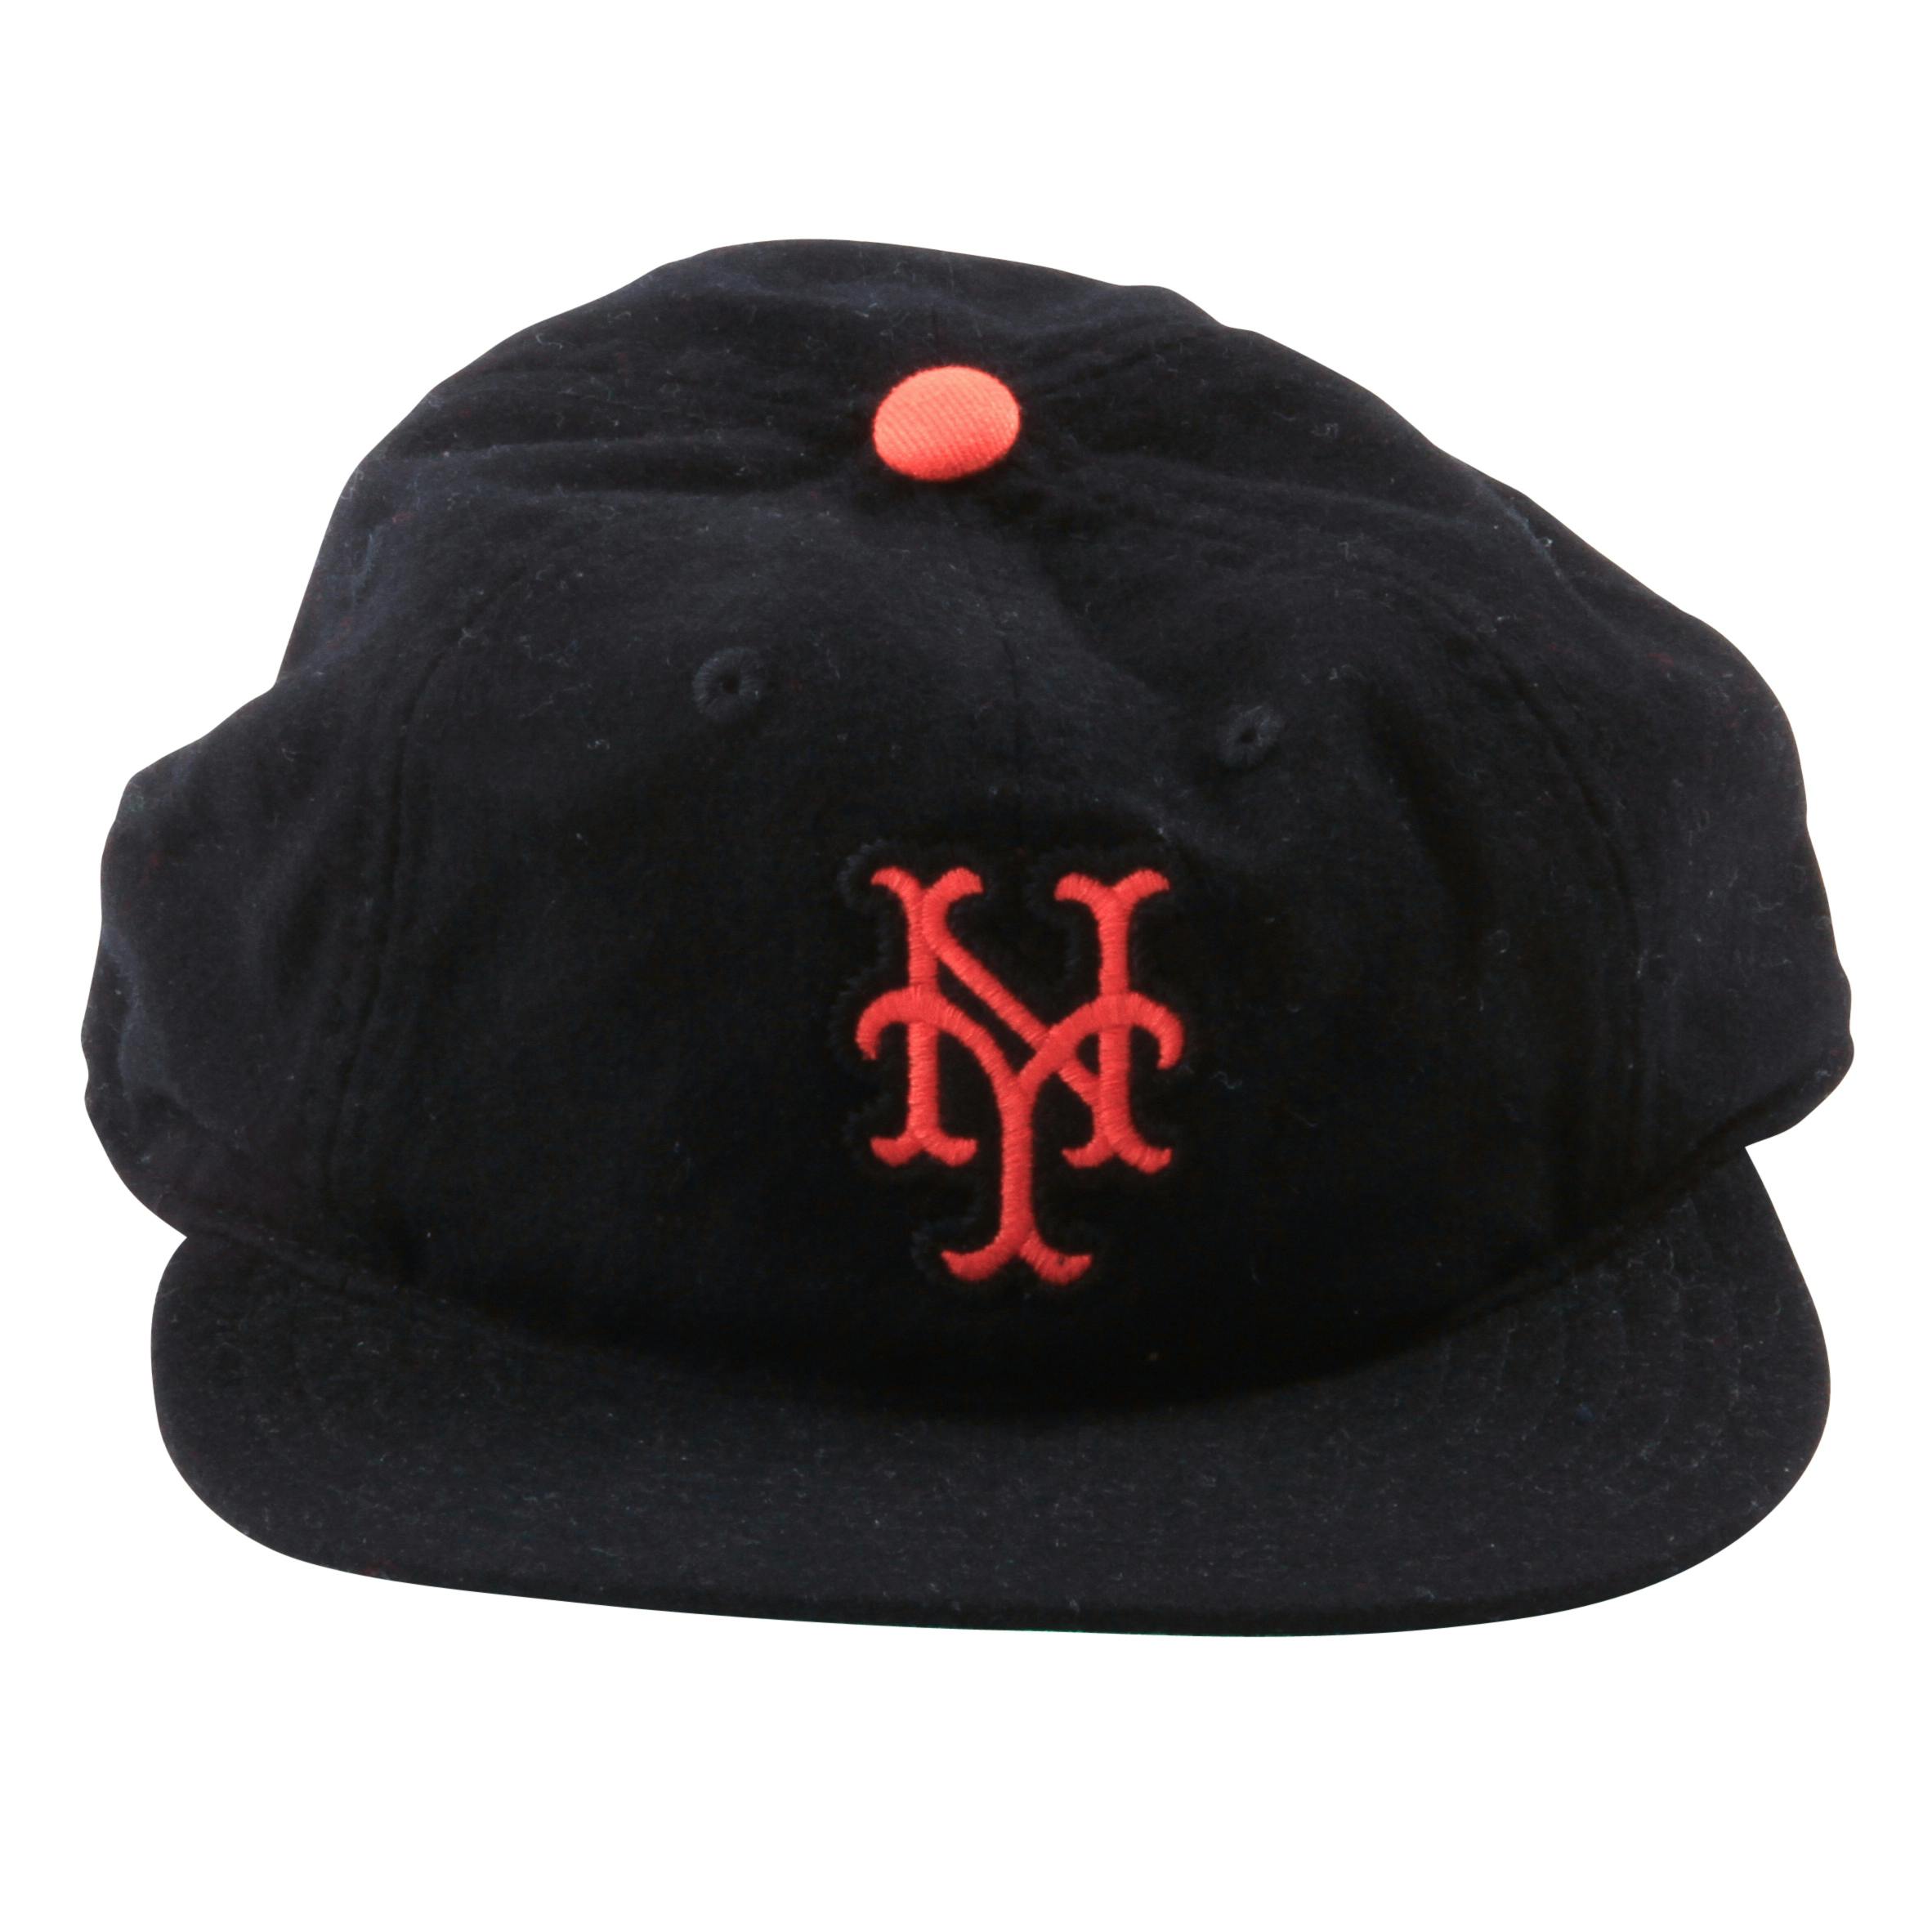 New York Giants - San Francisco Giants Cooperstown Collection caps by  American Needle since 1918